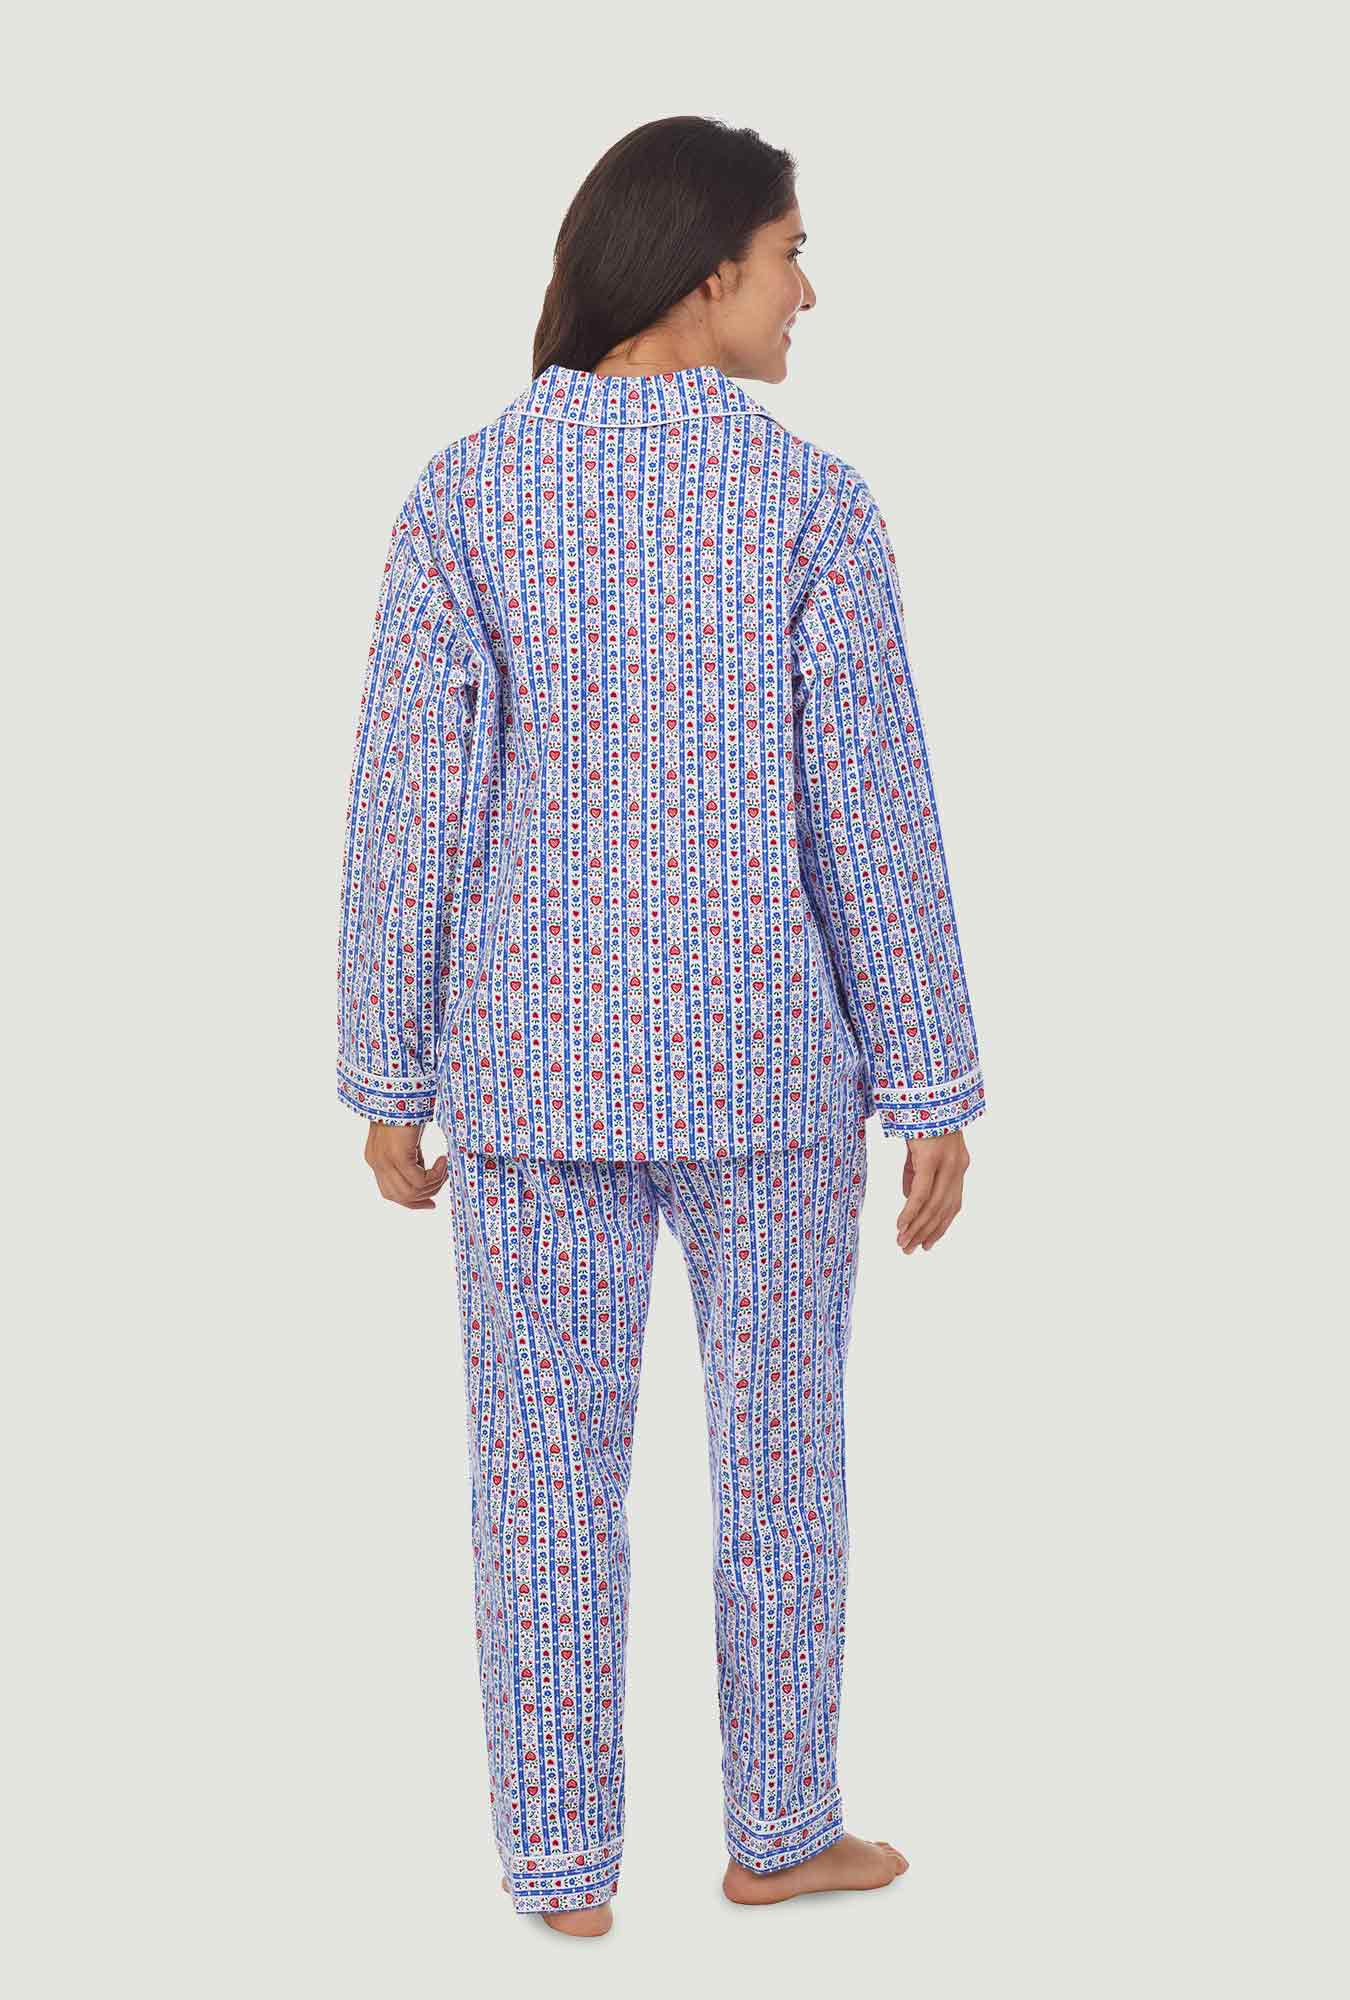 Lanz Tyrolean Flannel Pajamas  Womens flannel pajamas, Flannel